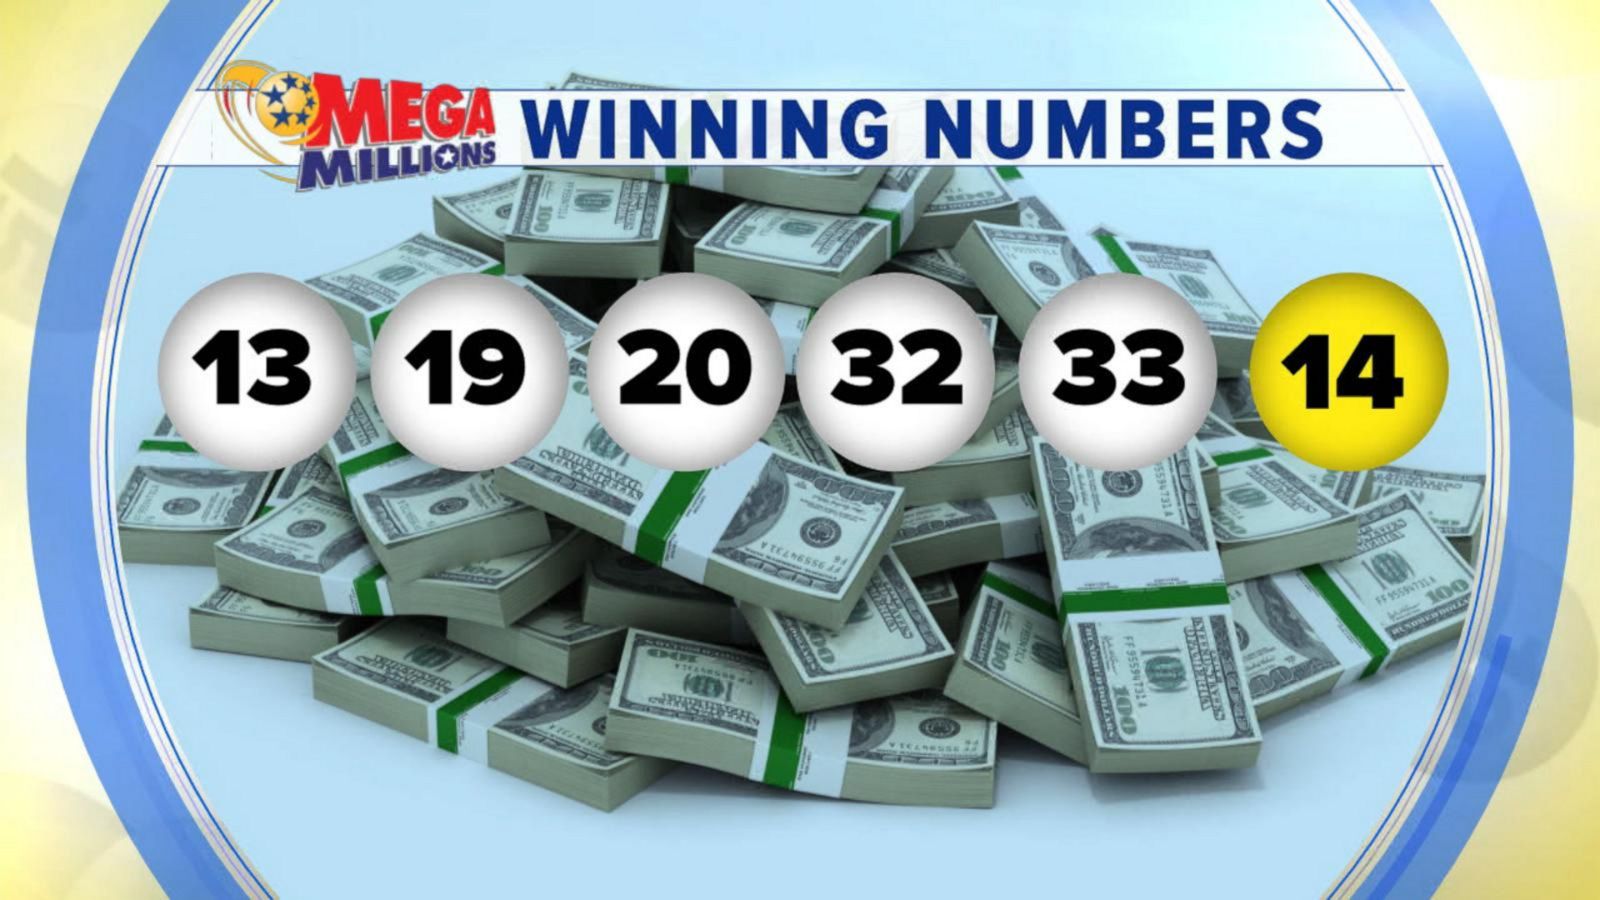 VIDEO: Winning ticket for record Mega Millions jackpot sold in Florida